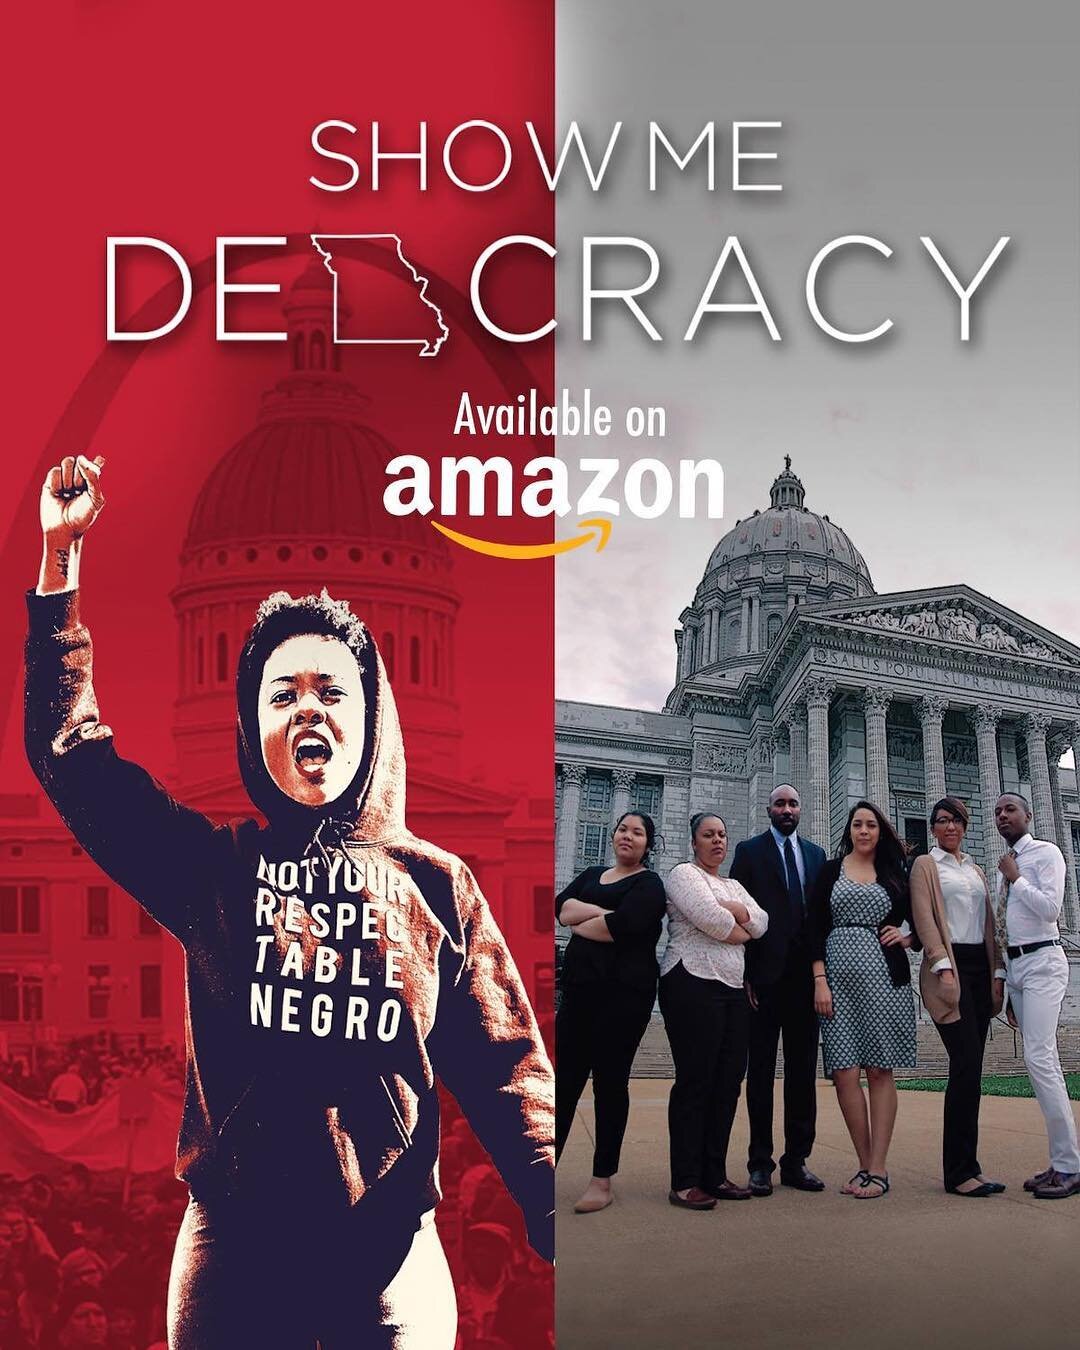 All four of our documentaries are now available on Amazon! @showmedemocracy